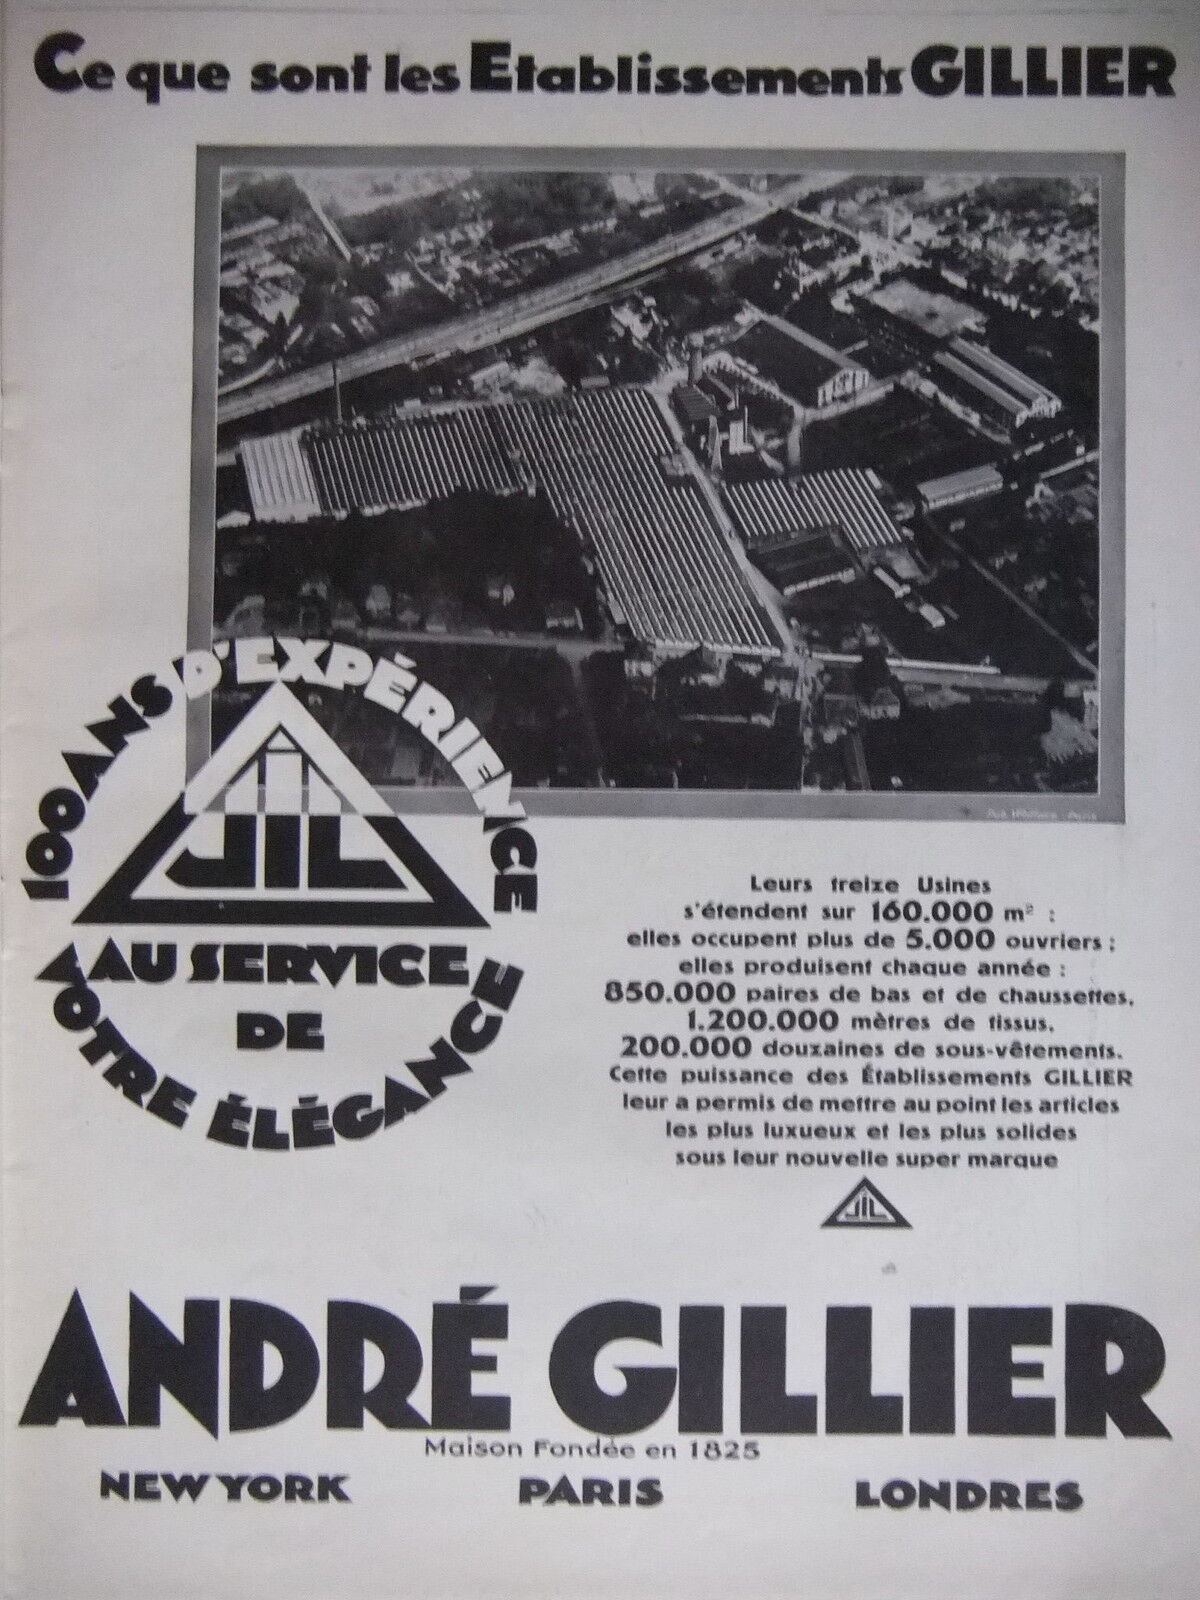 ADVERTISING ANDRÉ GILLIER JIL 100 YEARS OF EXPERIENCE SERVING YOUR ELEGANCE